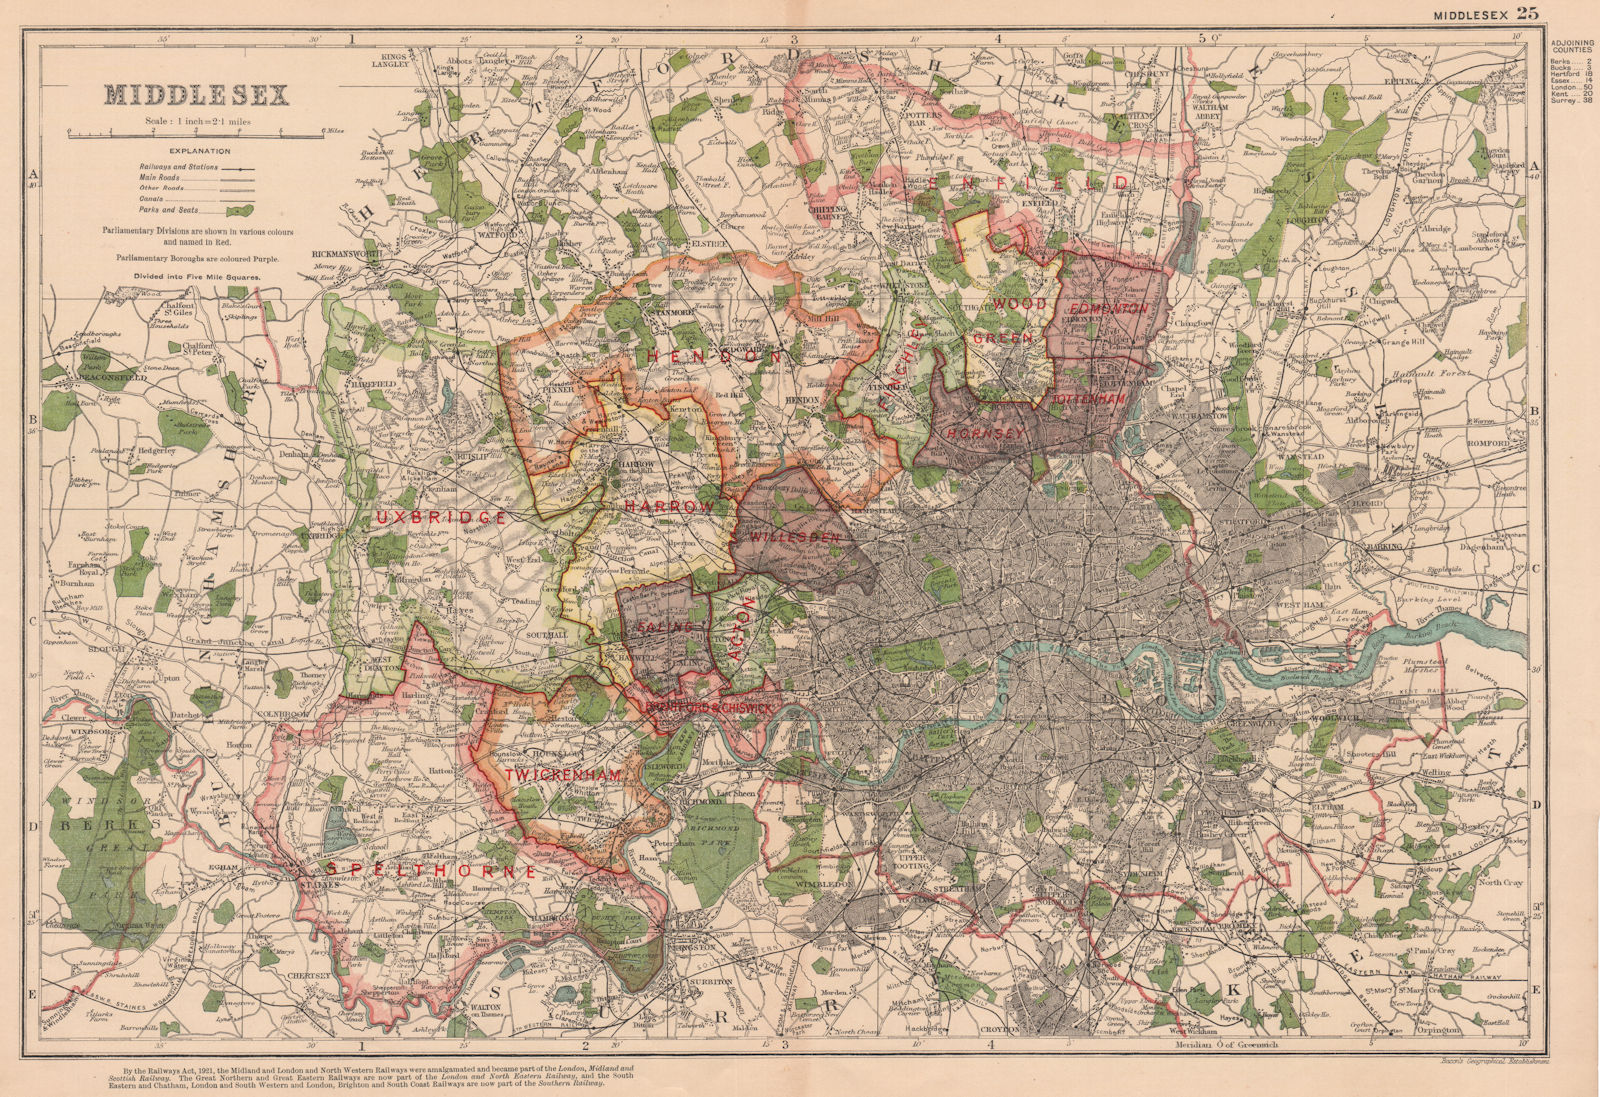 MIDDLESEX showing Parliamentary divisions,boroughs & parks.London.BACON 1927 map